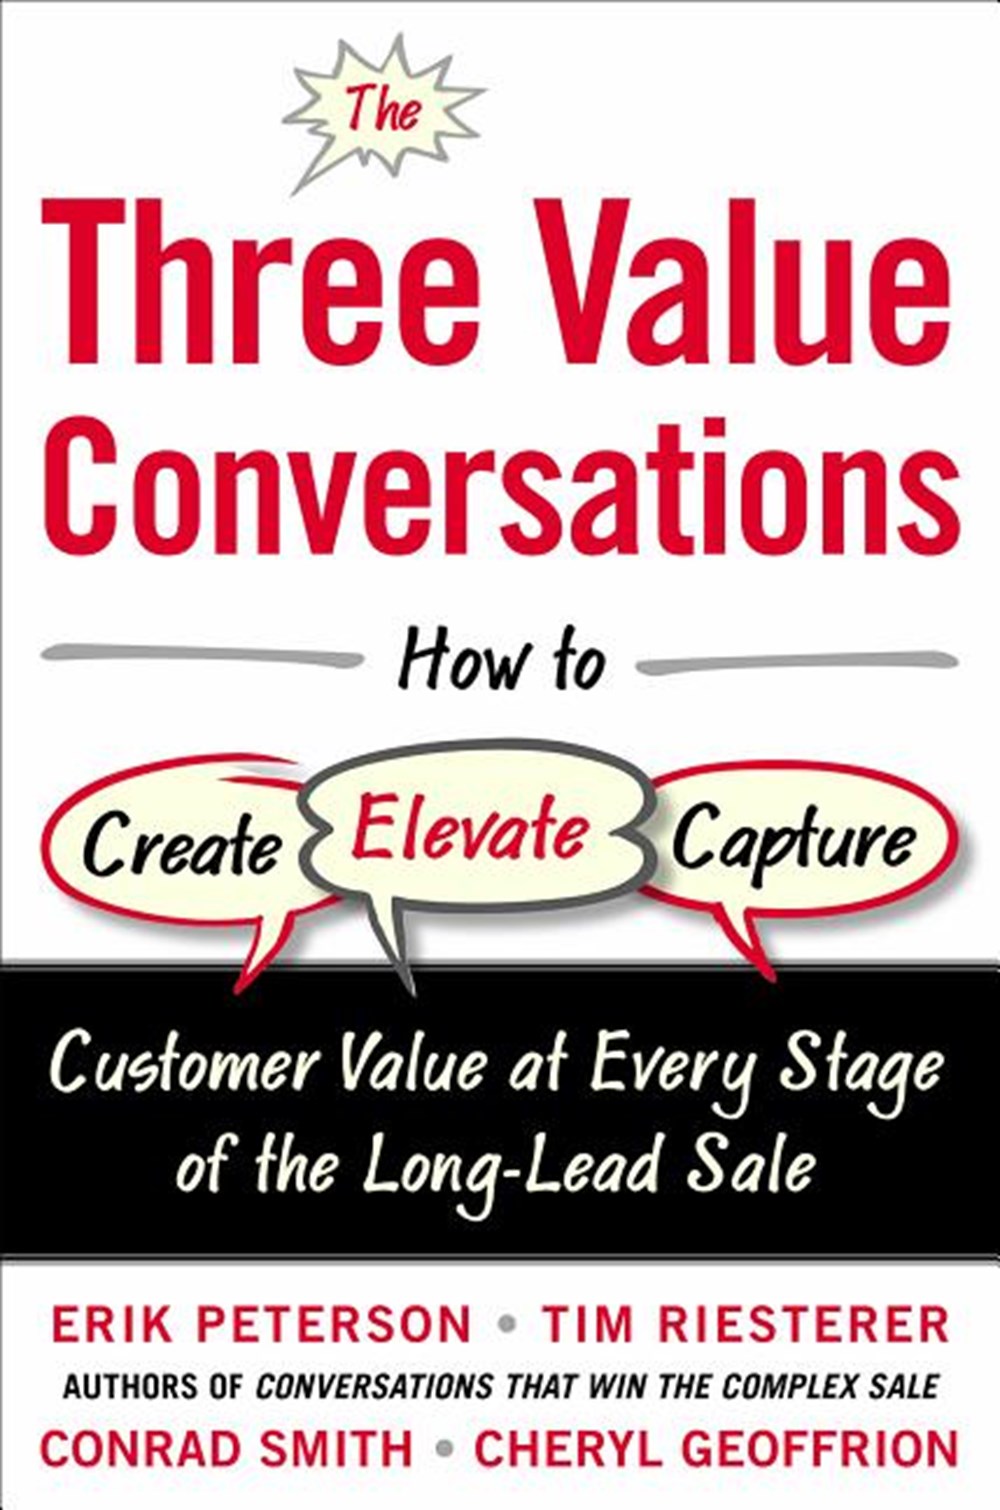 Three Value Conversations How to Create, Elevate, and Capture Customer Value at Every Stage of the L